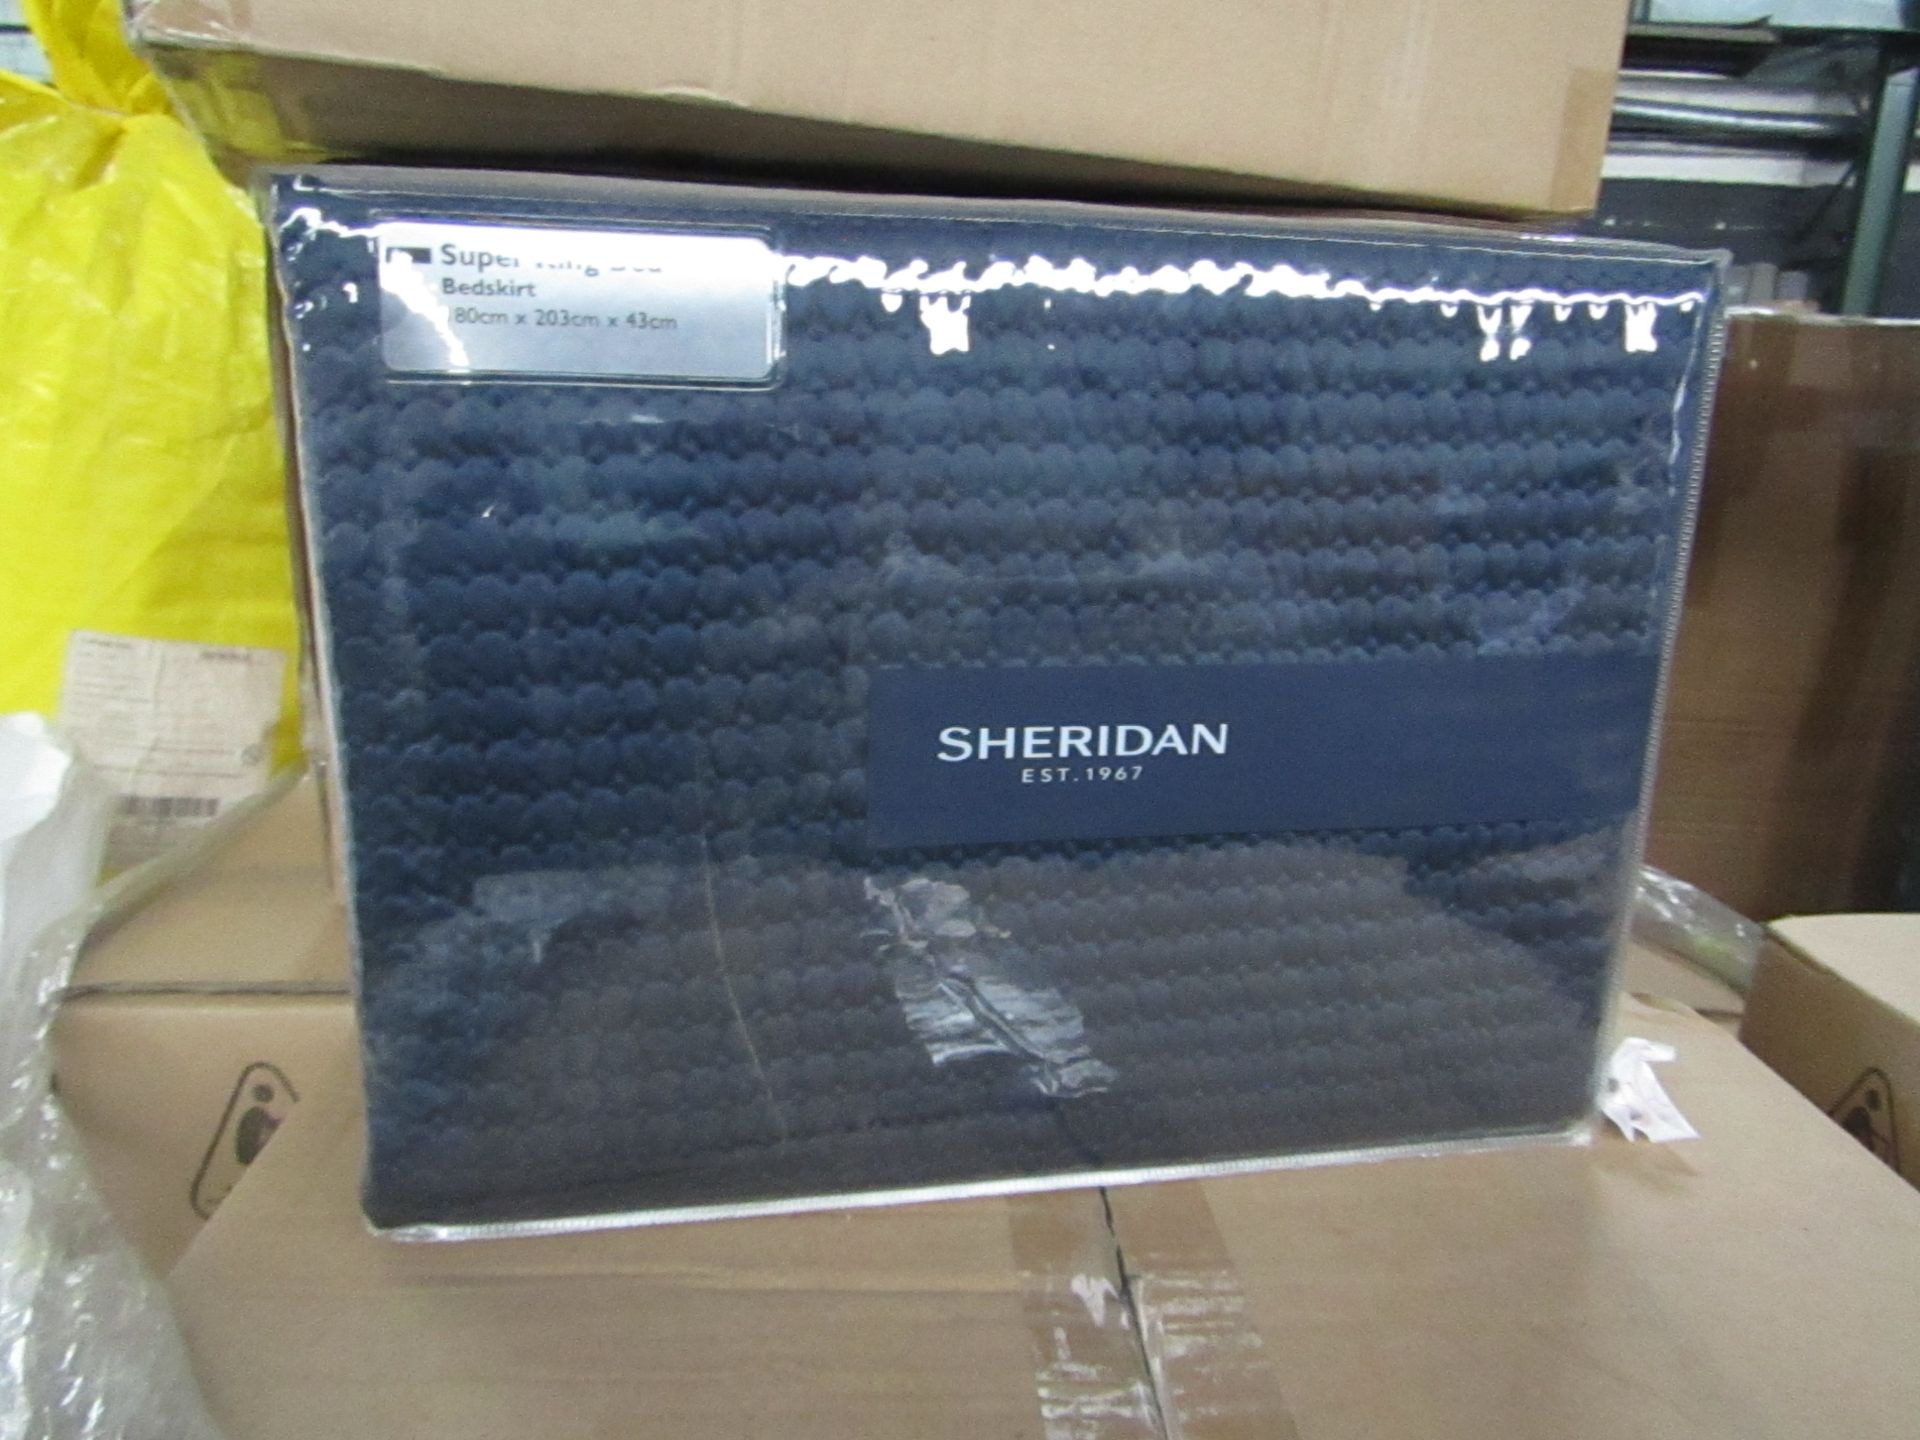 3X Sheridan - Midnight Bed Skirt - New & Packaged. RRP £75 Each. - Image 2 of 2